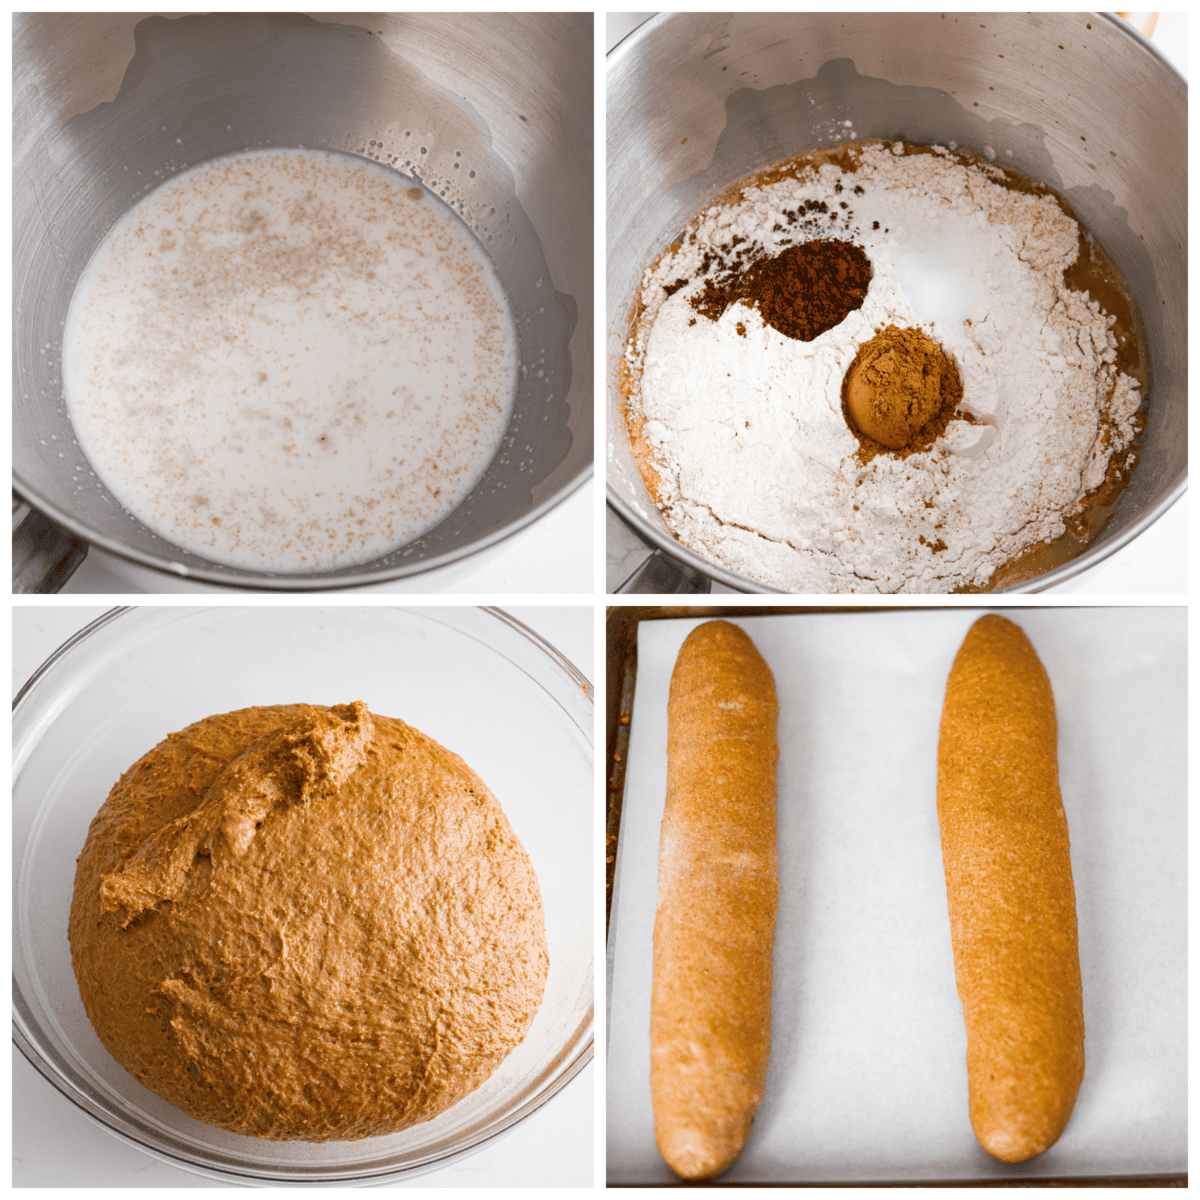 First process photo of the milk and yeast in a mixing bowl. Second process photo of the dry ingredients added to the mixing bowl. Third process photo of the bread proofing. Fourth photo of the loaves shaped before baking.